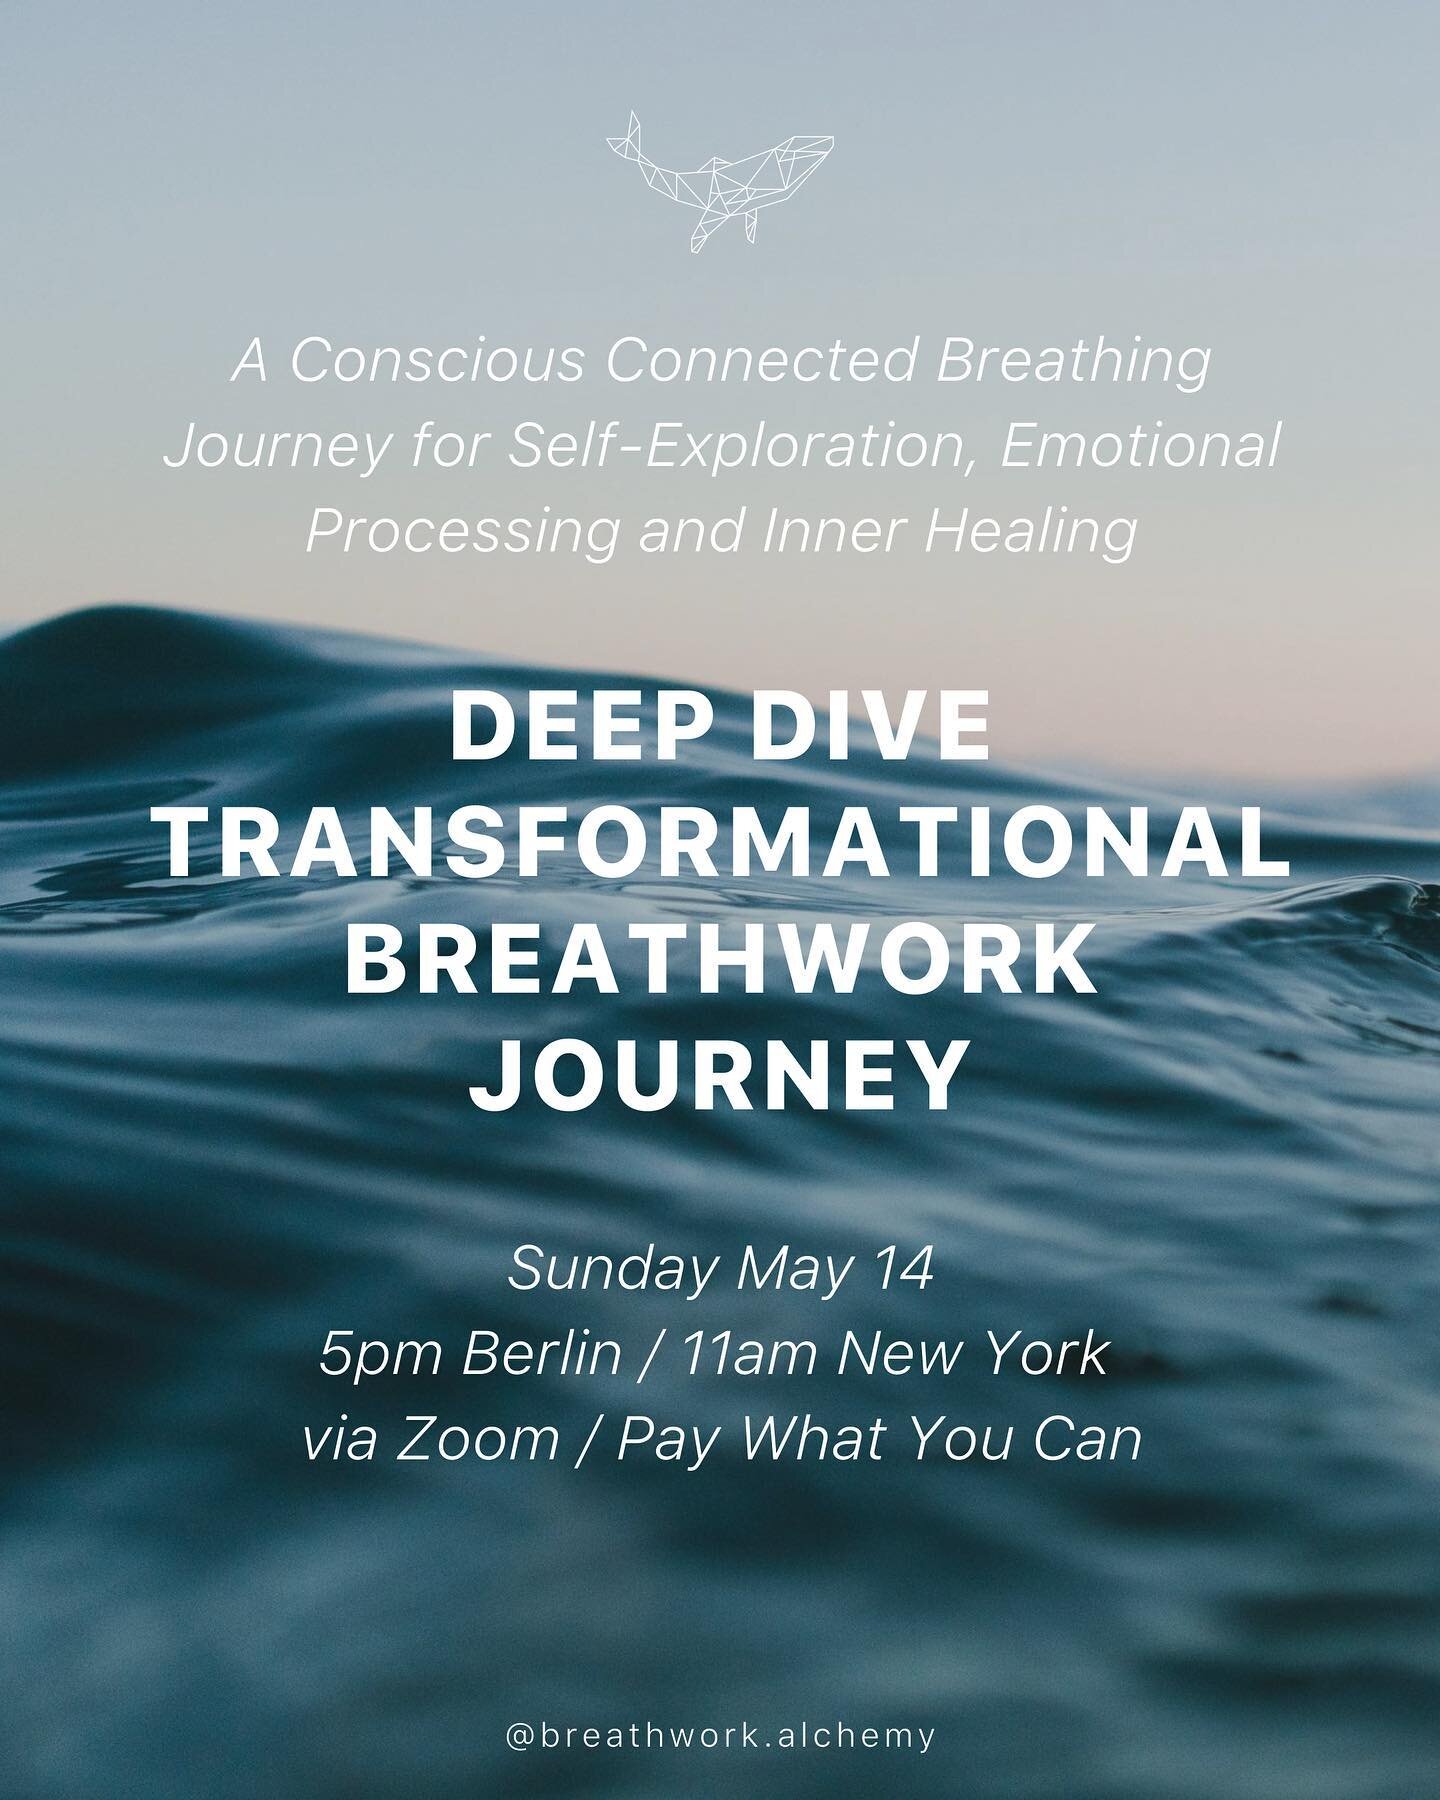 Let&lsquo;s breathe and dive deep together! BREATHWORK TO HEAL, FEEL AND RELEASE 💨 - a 2.5-hour online breathwork session next Sunday May 14th!

🐋 Transformational Breathwork is an active meditation using the conscious connected breathing technique